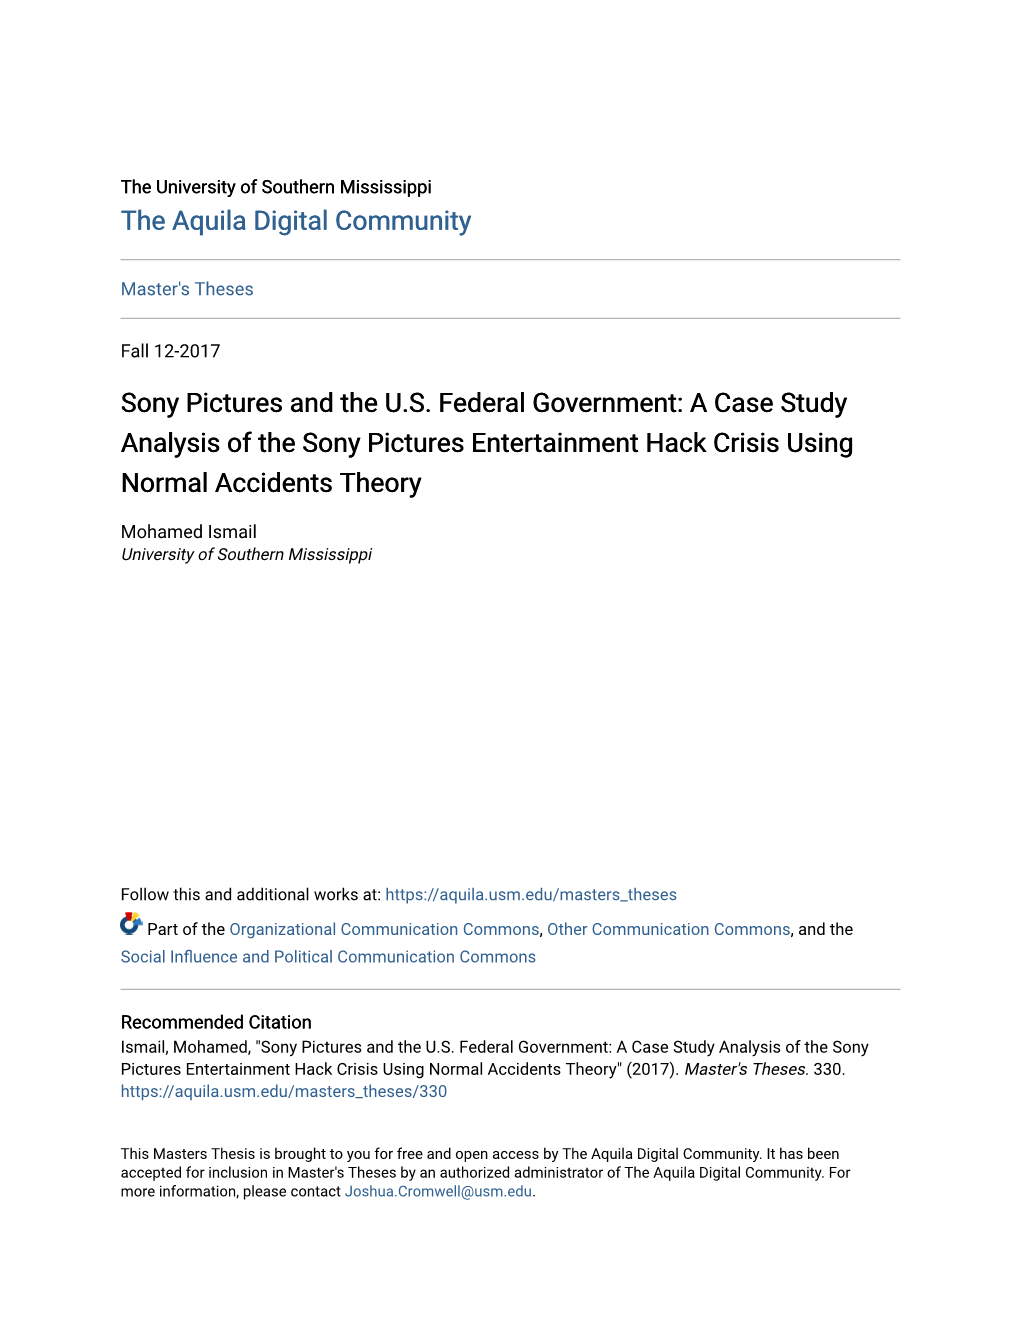 A Case Study Analysis of the Sony Pictures Entertainment Hack Crisis Using Normal Accidents Theory